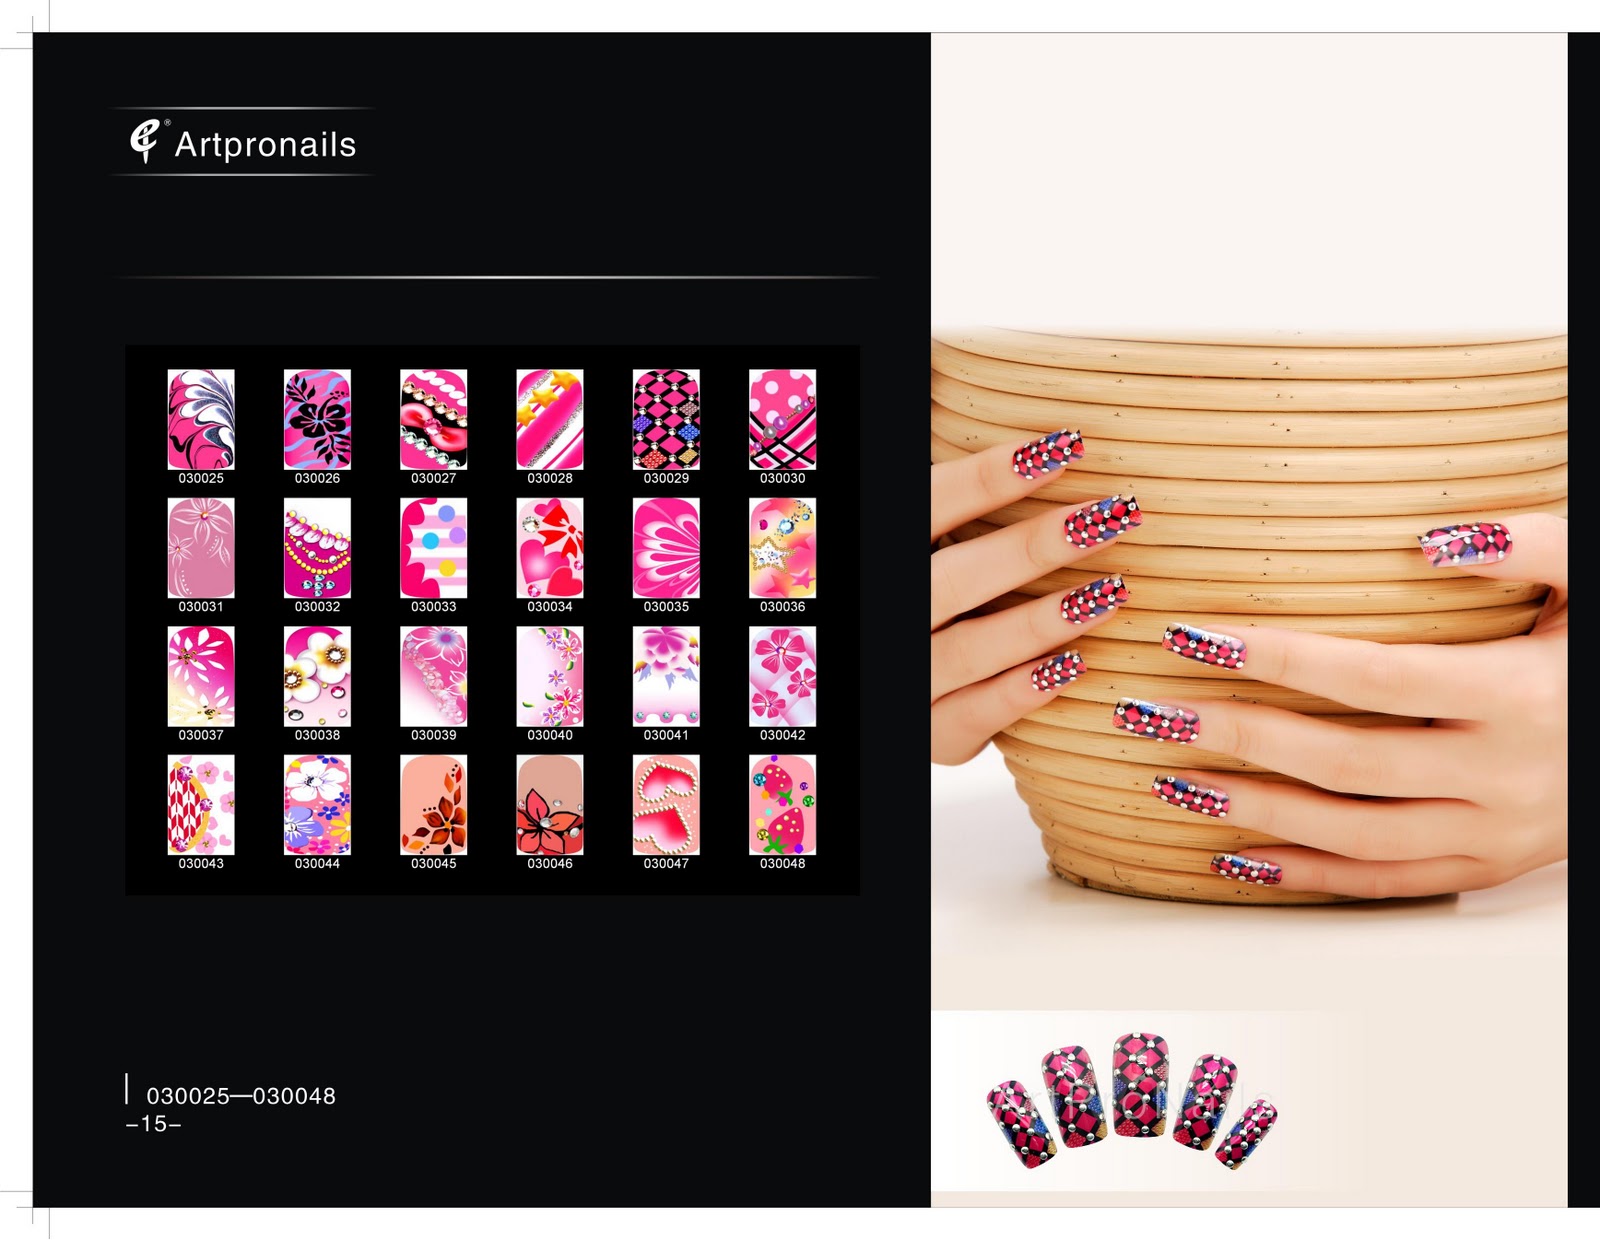 3. Nail Art Catalogs for Inspiration - wide 3